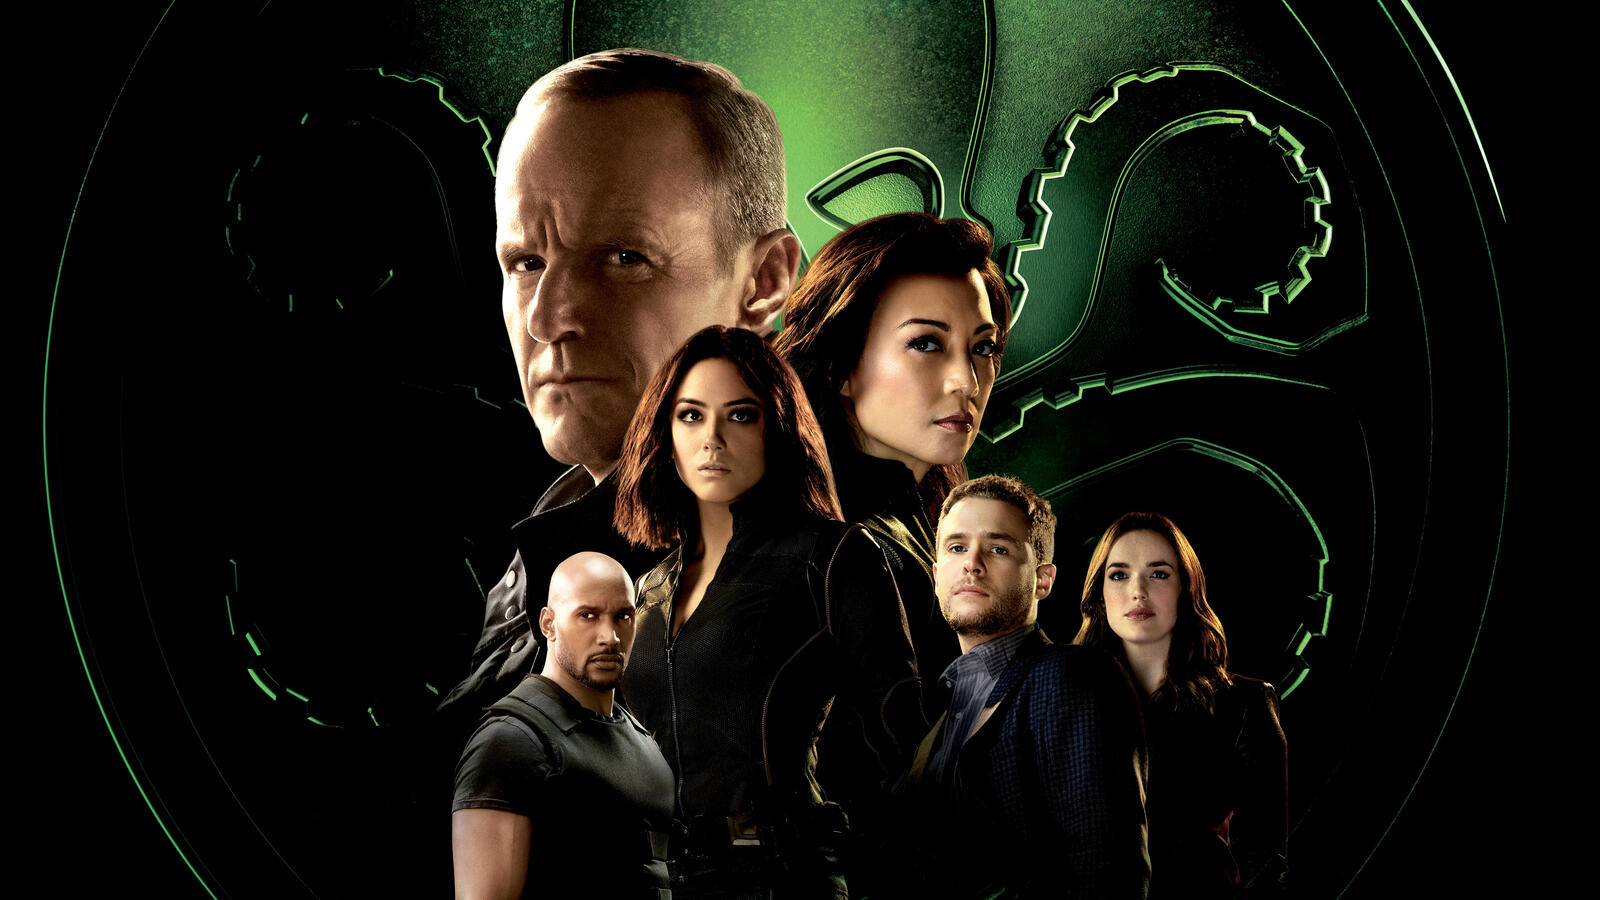 Wallpapers TV show people Agents Of Shield on the desktop